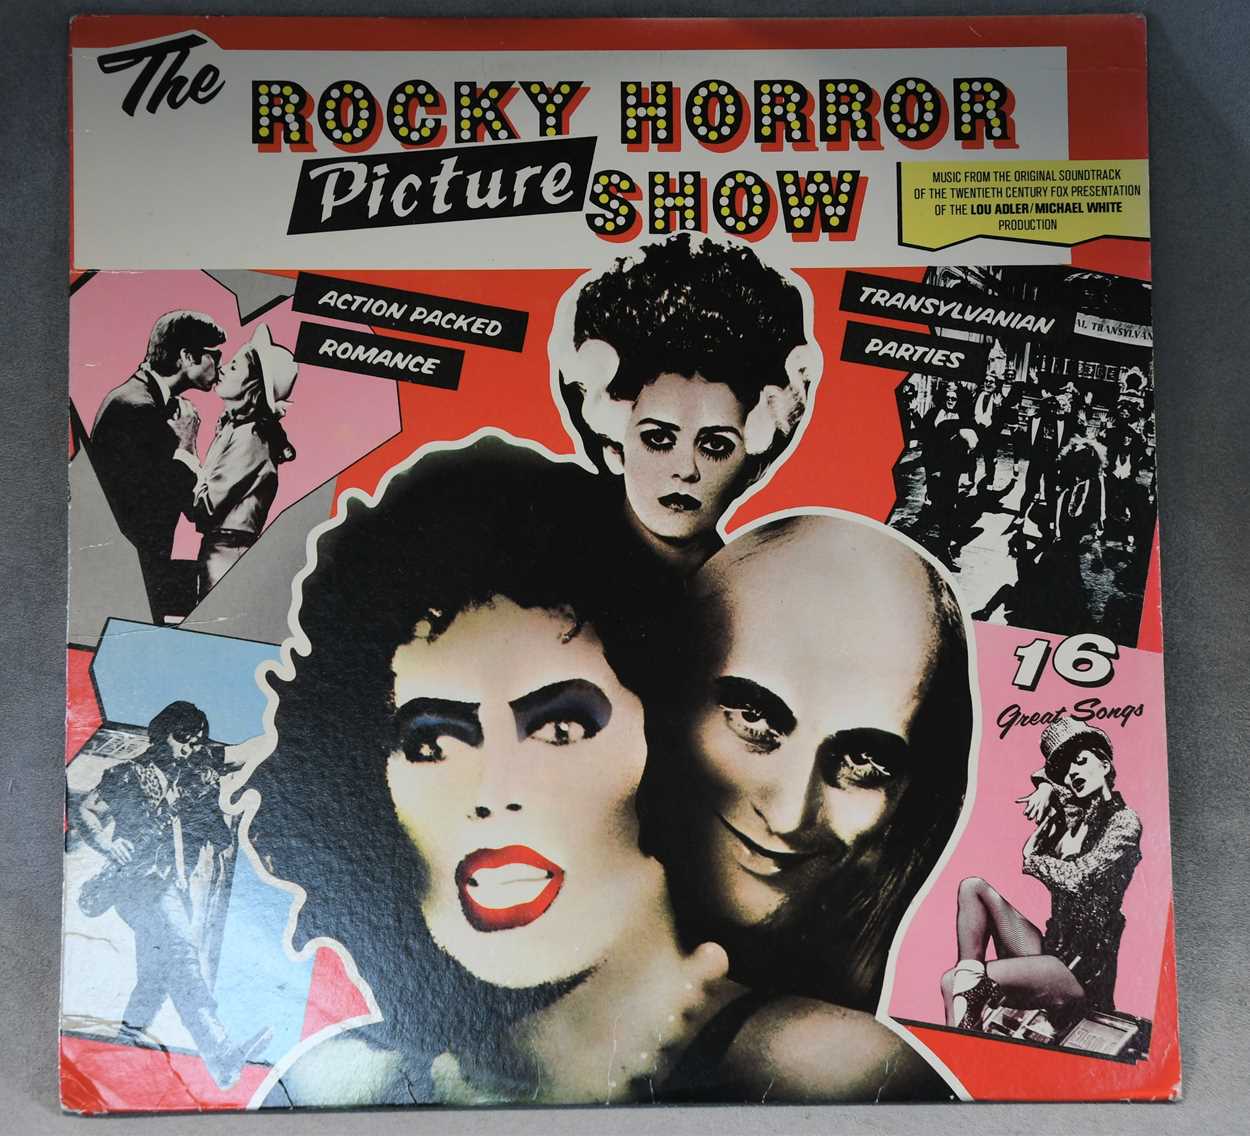 The Rocky Horror Picture Show (1975) UK Quad poster, first release poster designed by John Pasche; - Image 2 of 20